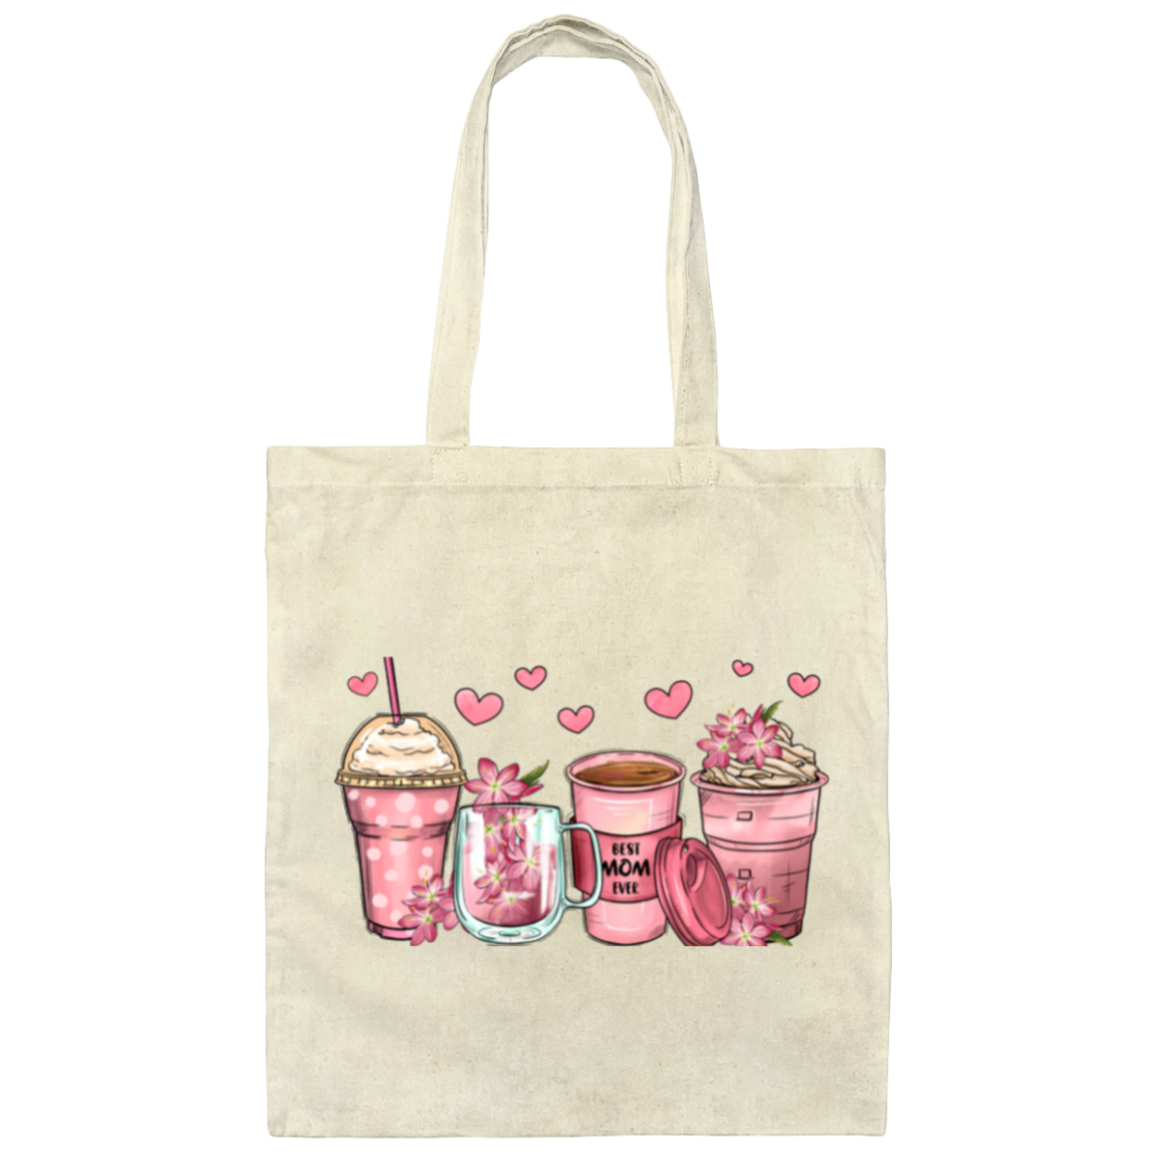 "Best Mom" Canvas Tote Bag